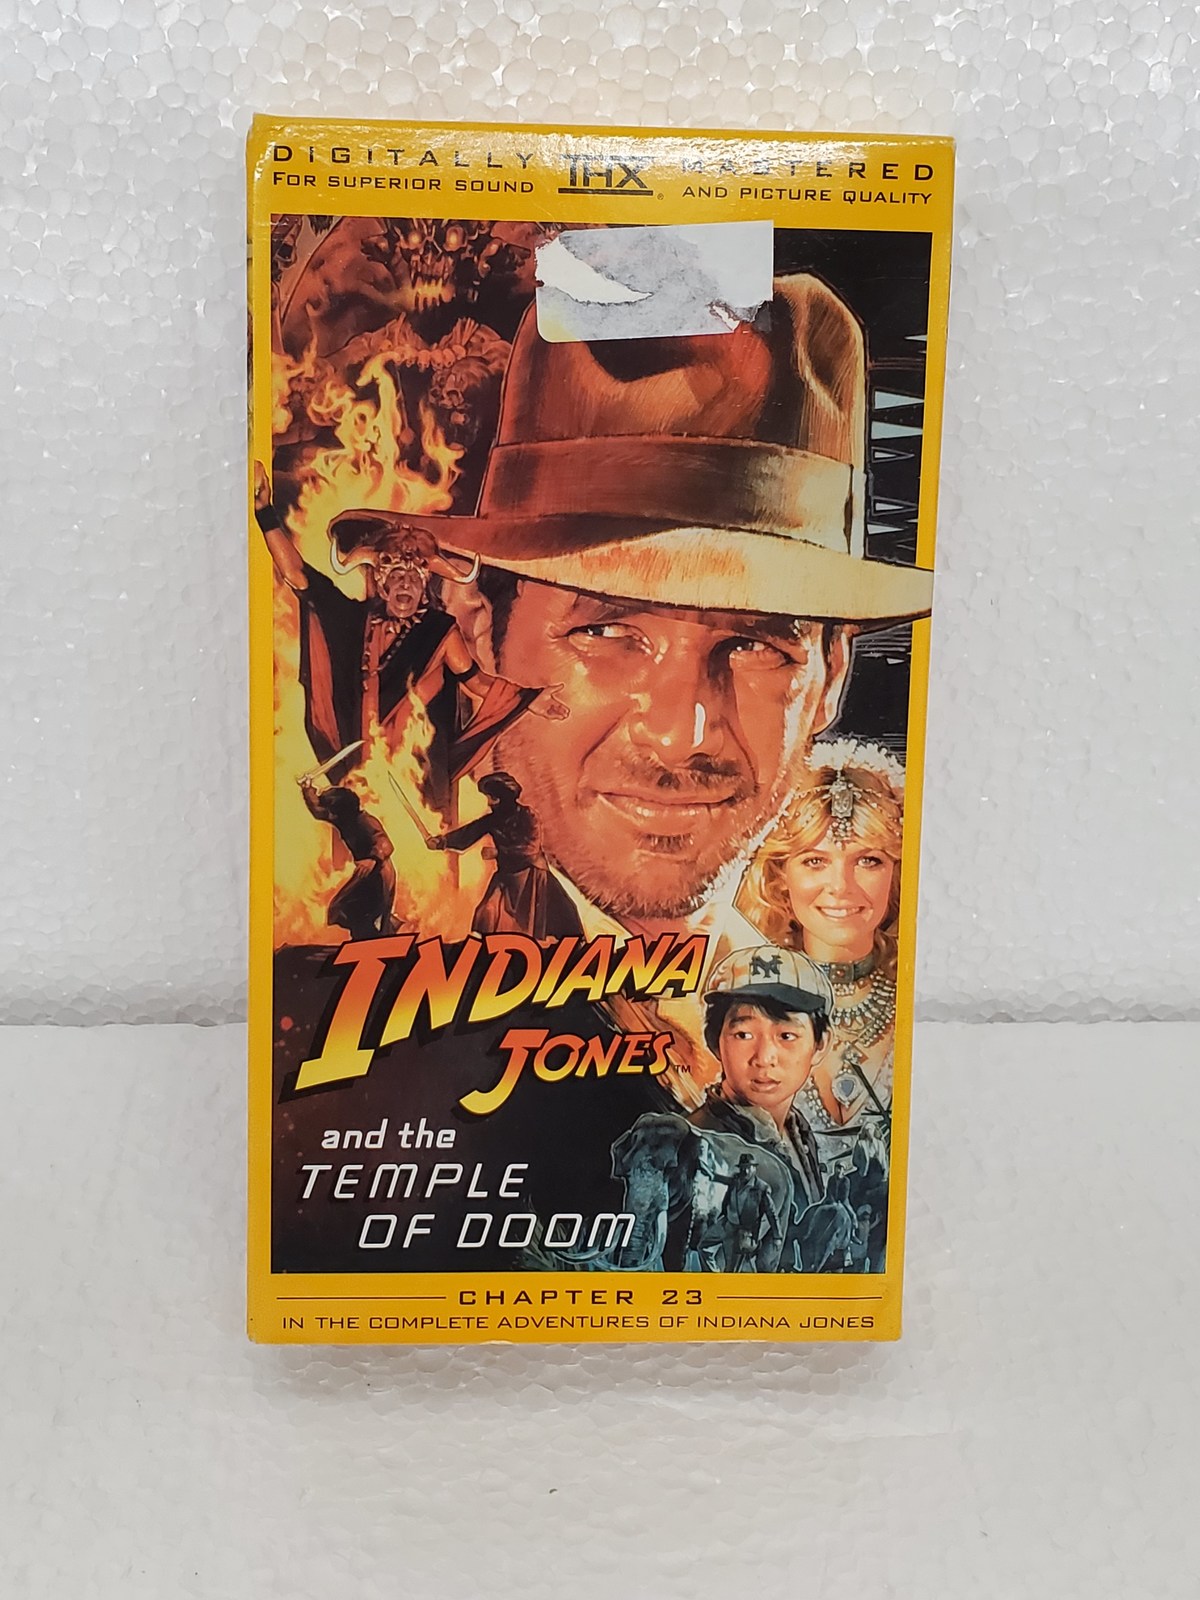 Primary image for Vintage 'Indiana Jones and the Temple of Doom (Chapter 23), VHS, 1984